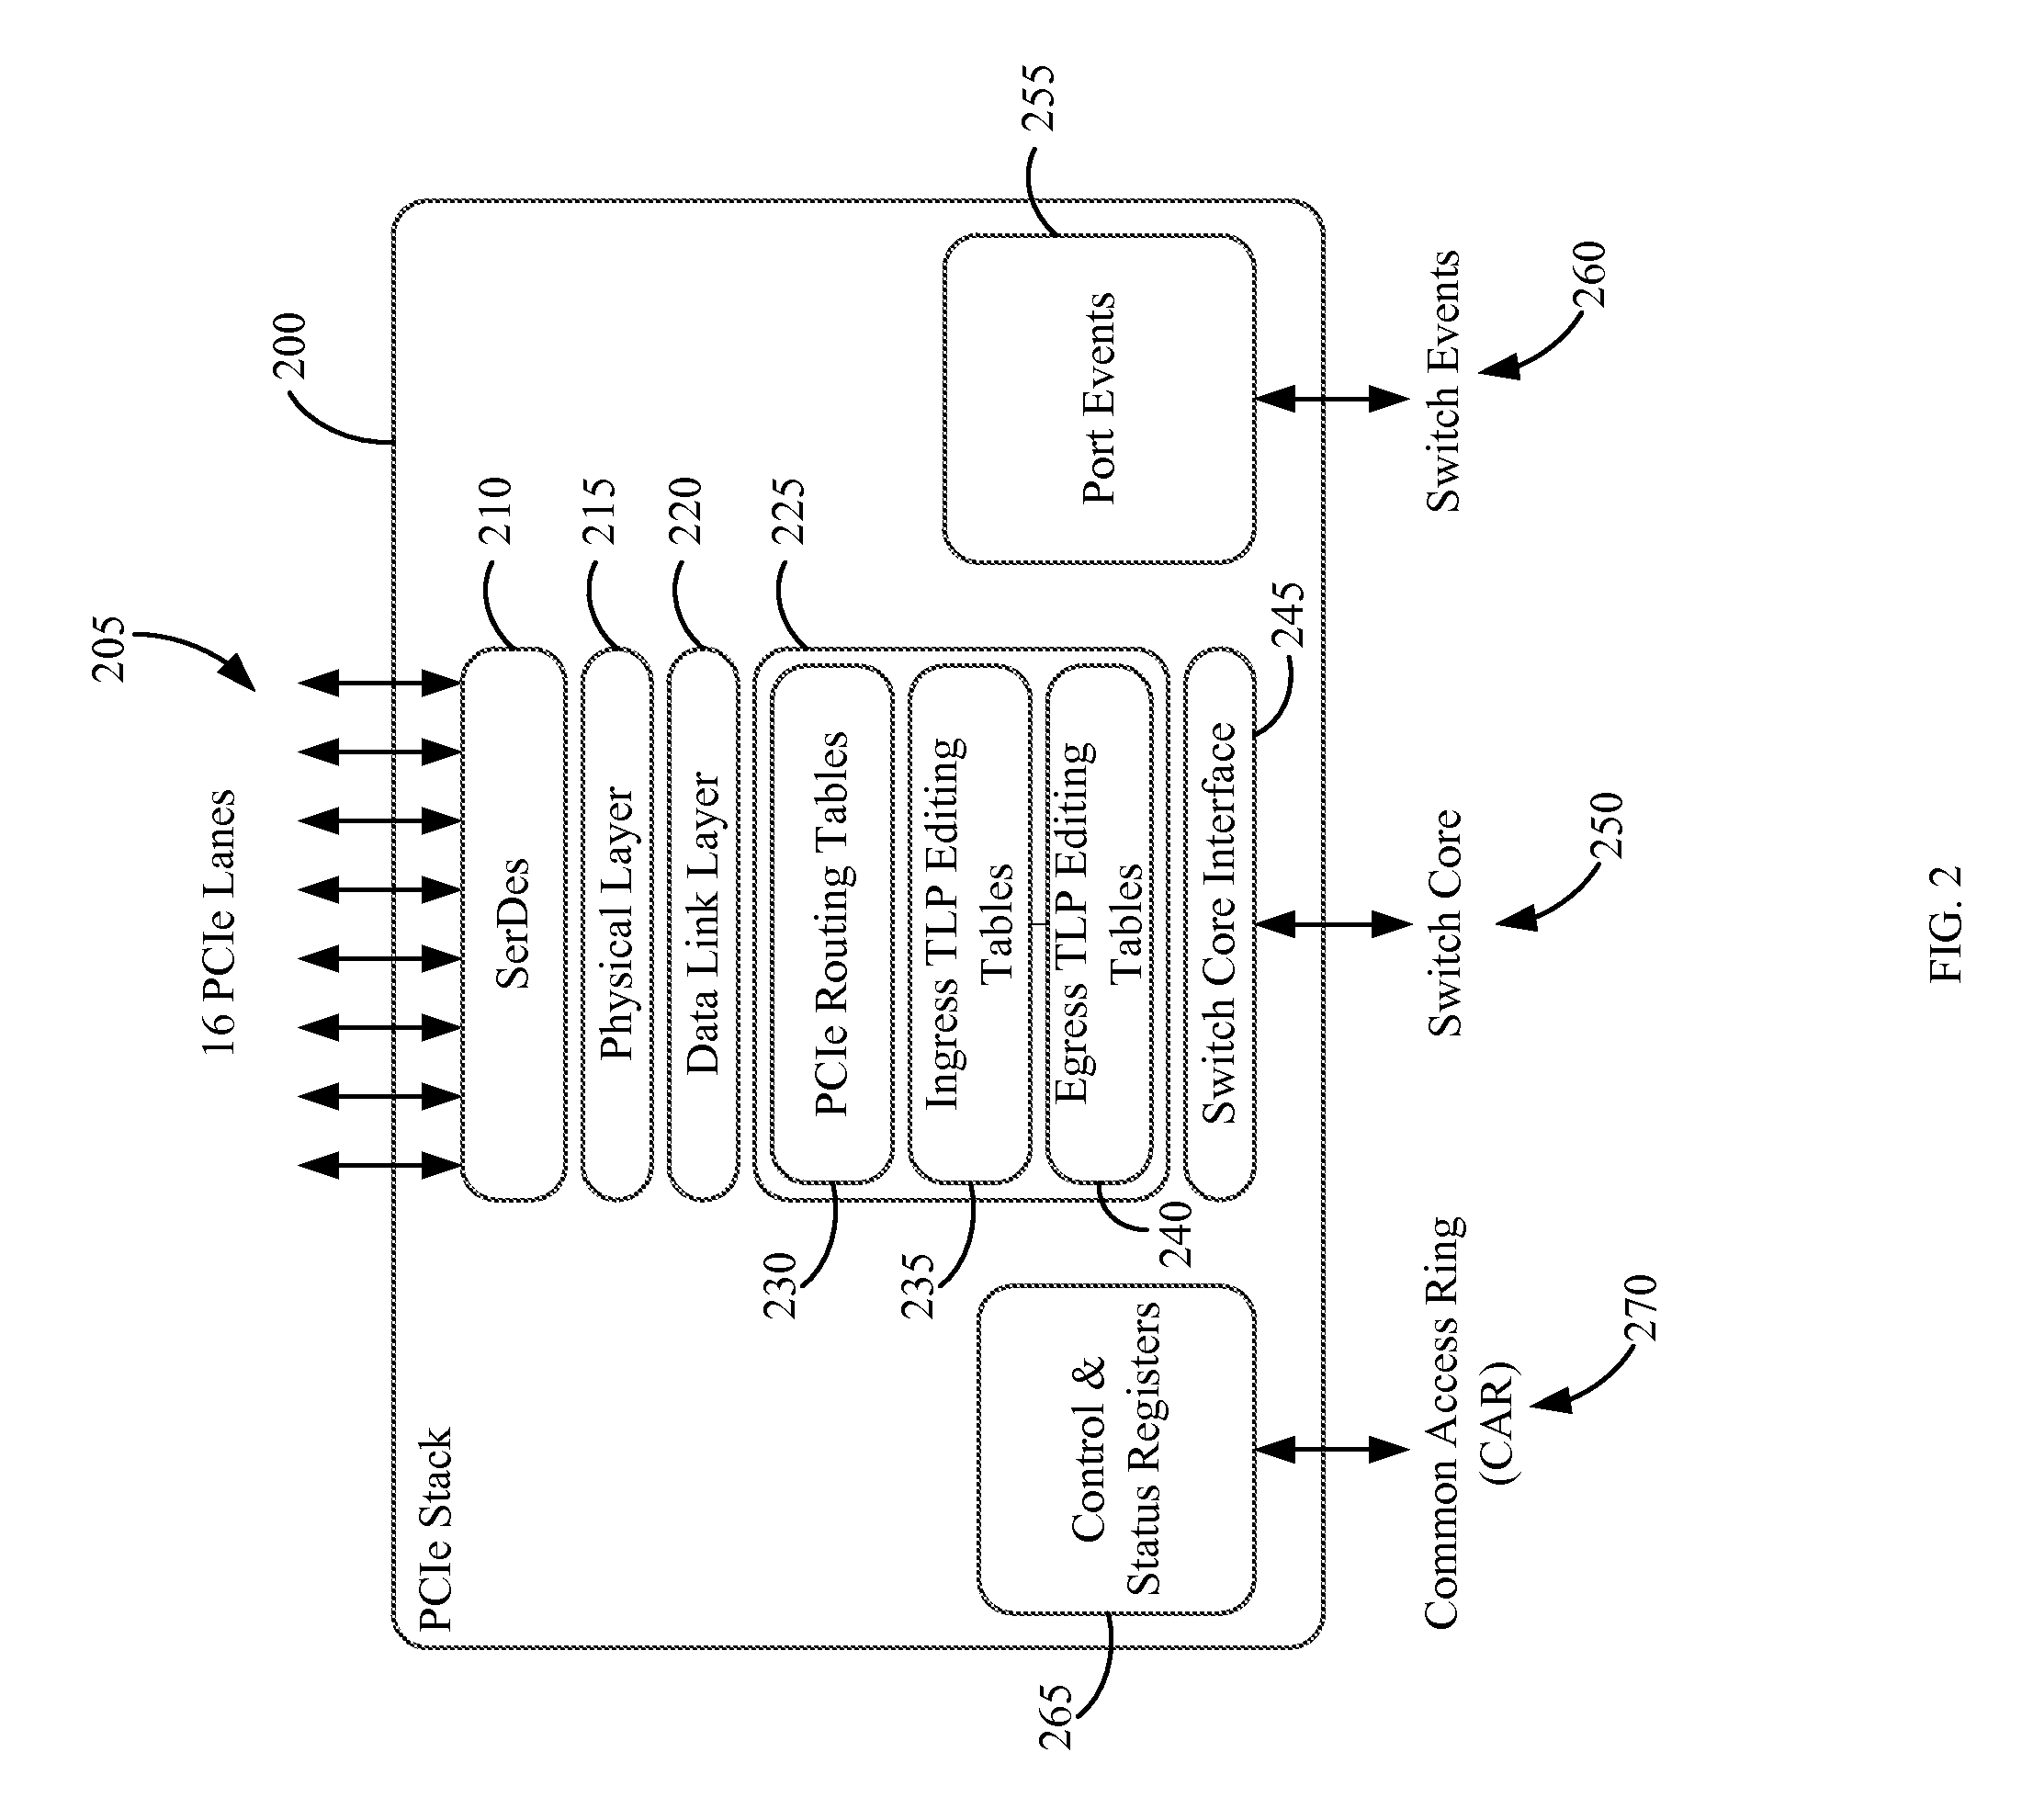 Method and apparatus for mapped I/O routing in an interconnect switch